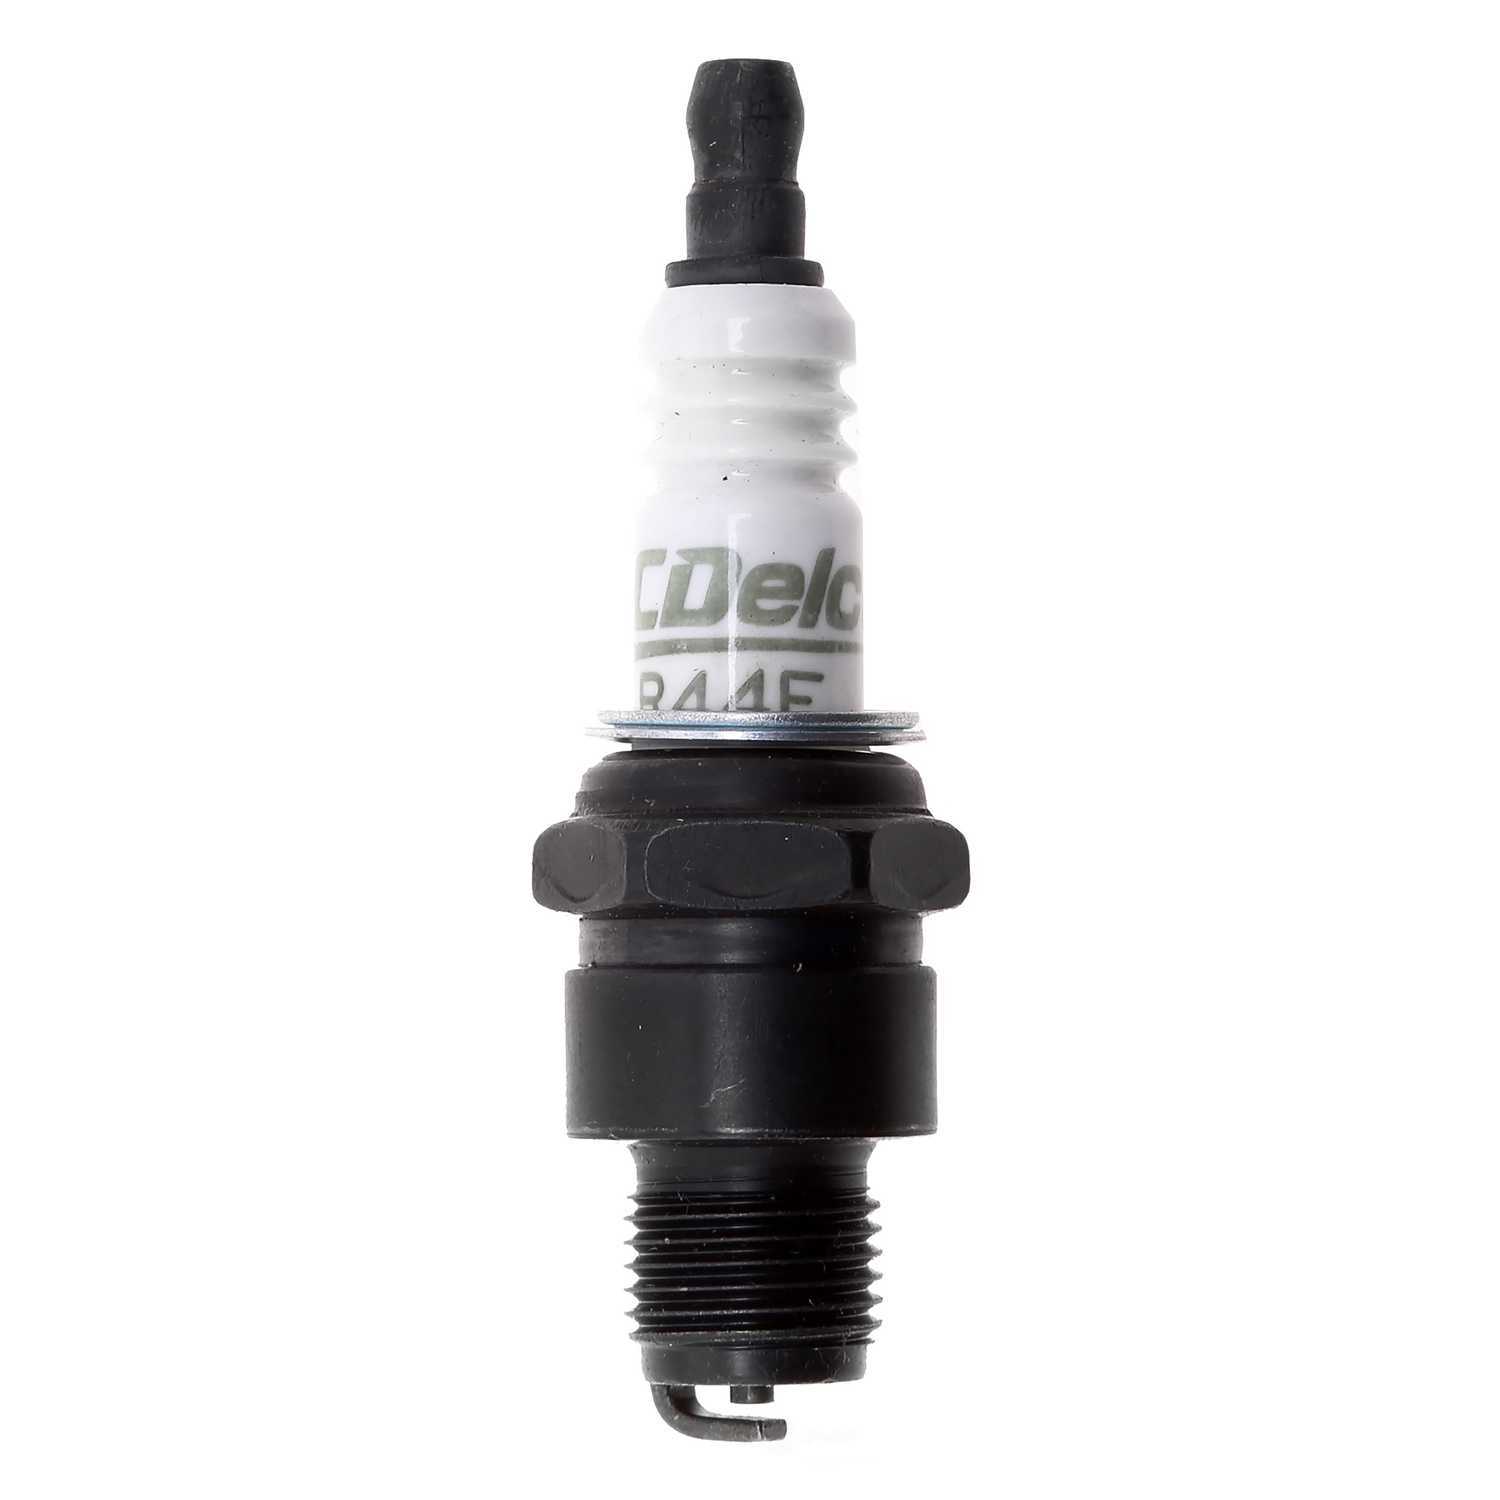 ACDELCO GOLD/PROFESSIONAL - Conventional Spark Plug - DCC R44F